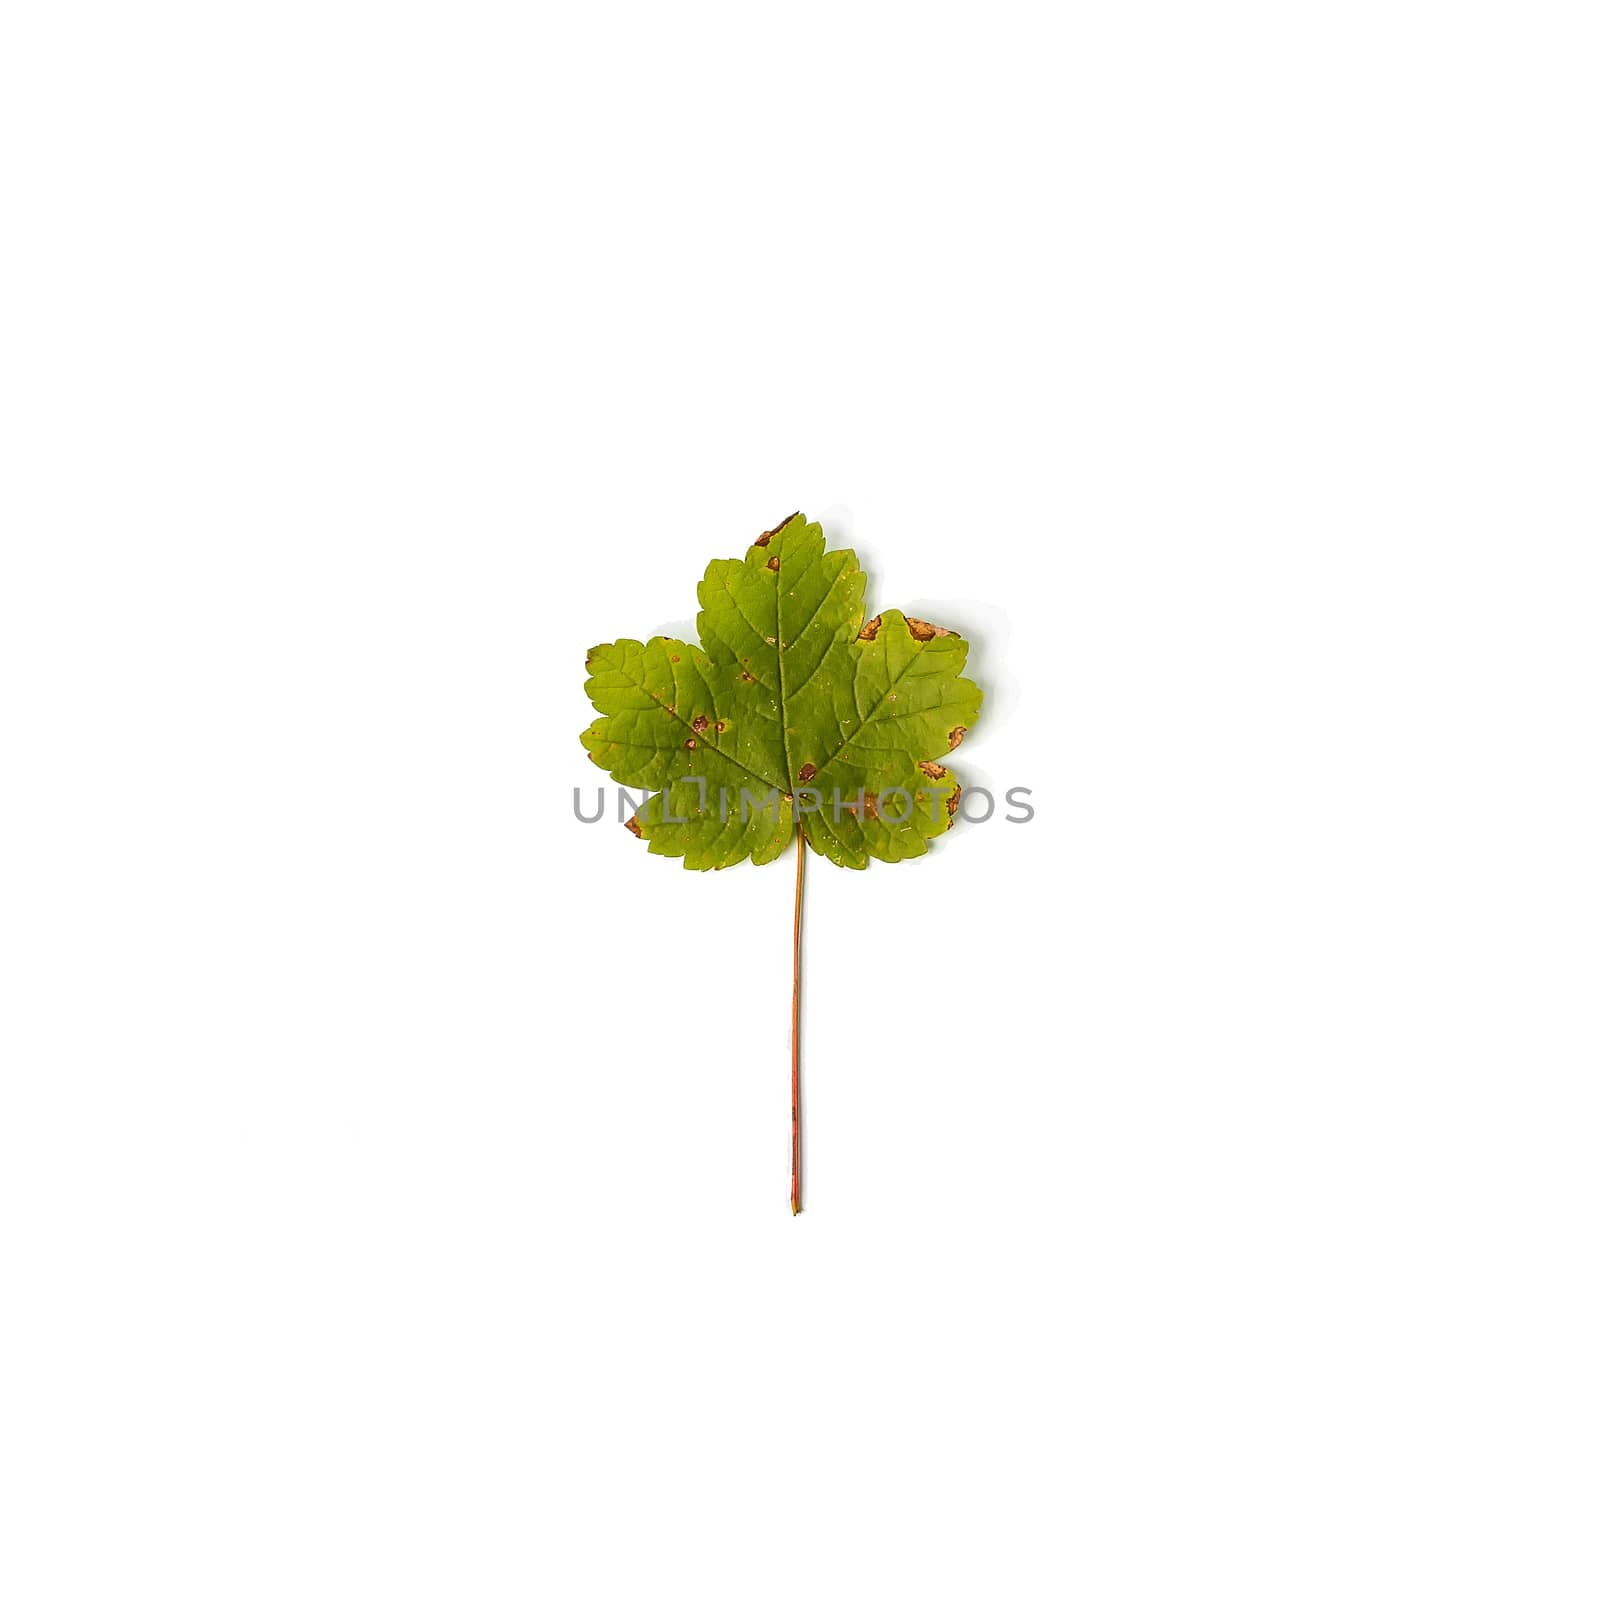 Green maple leaf isolated on a white background by JRPazos